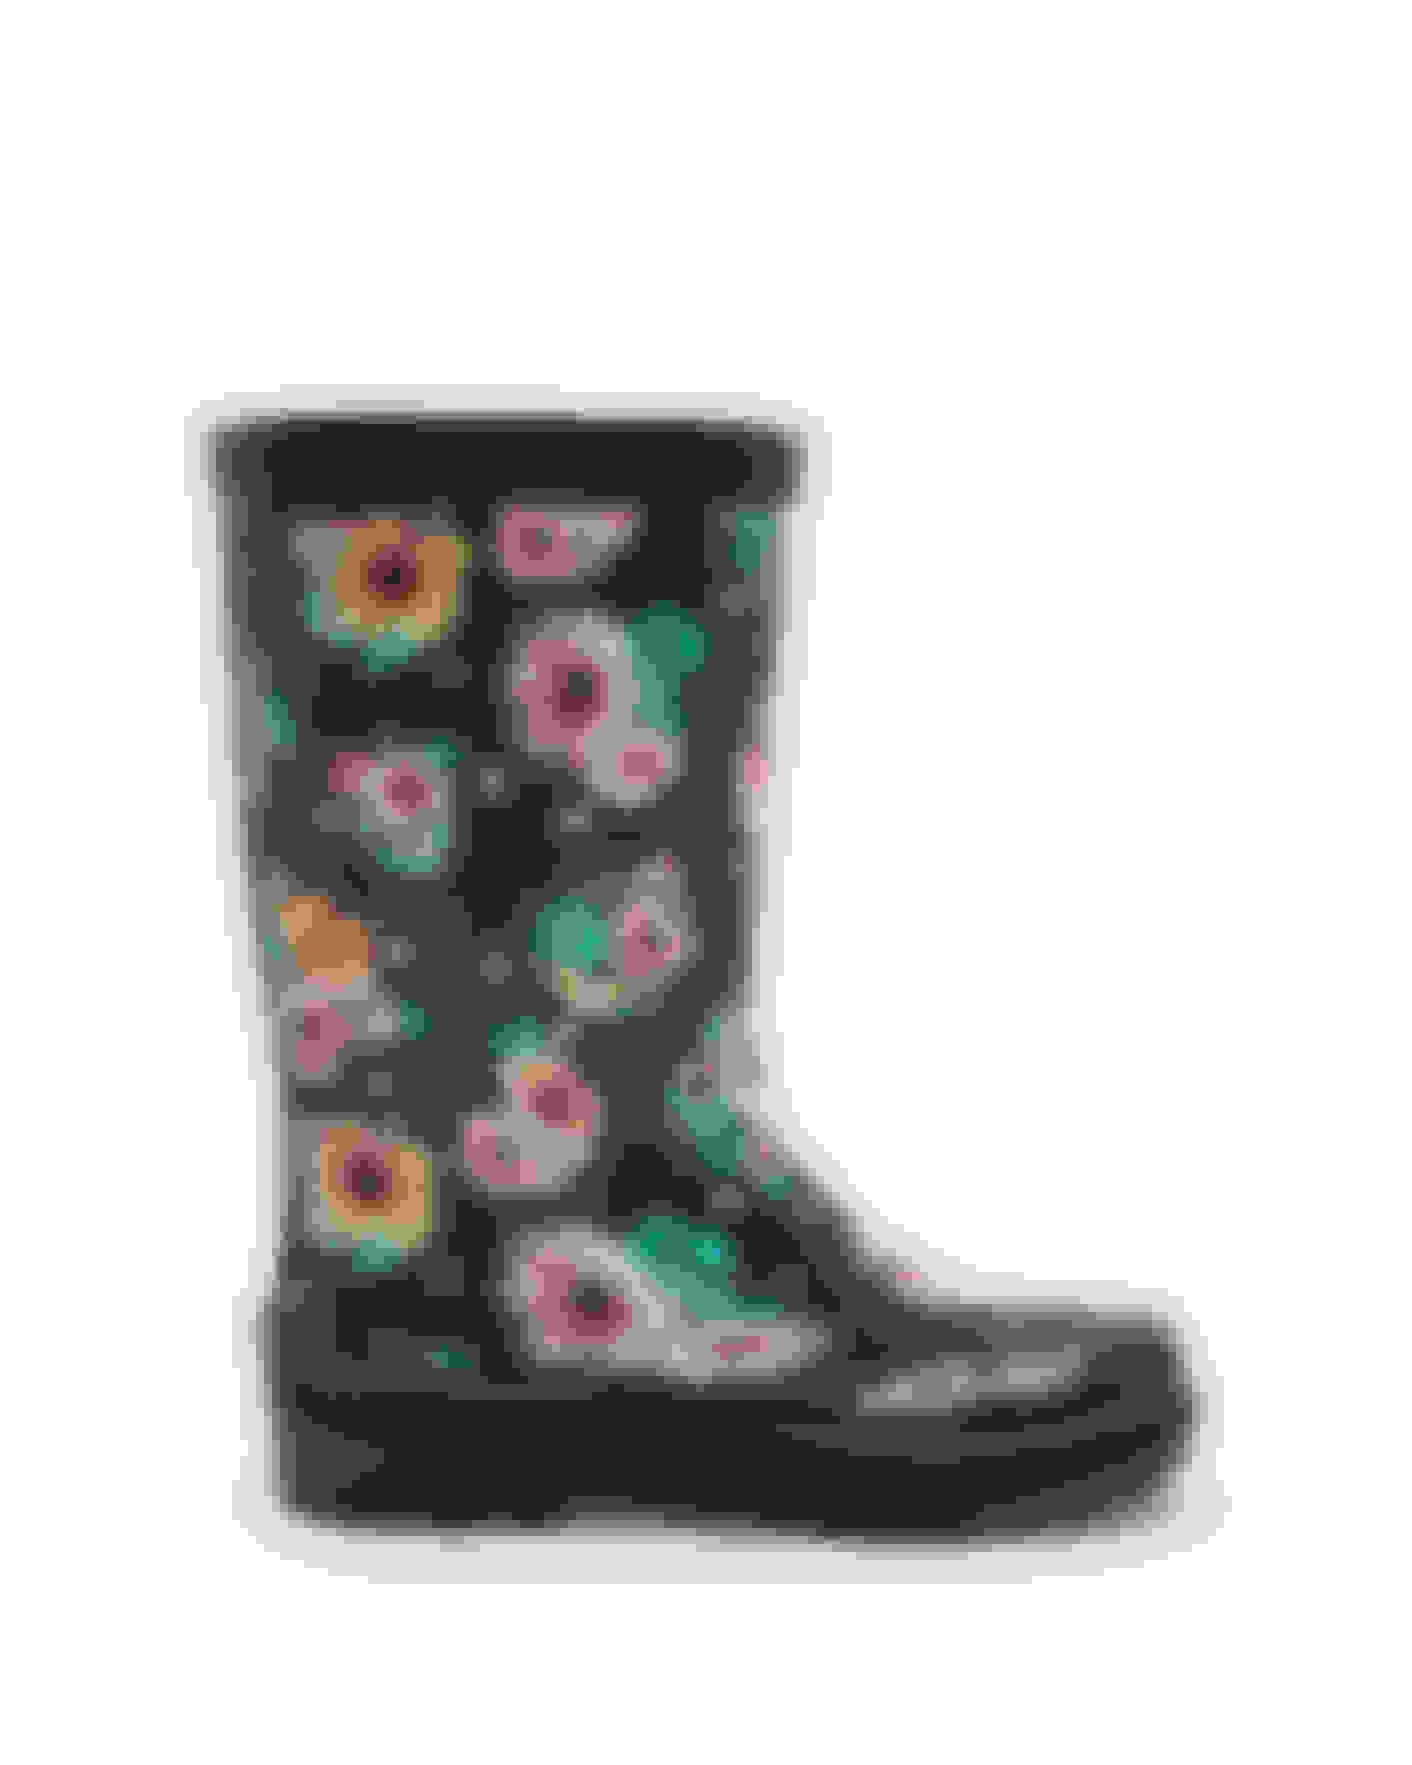 Navy Floral Wellies Ted Baker